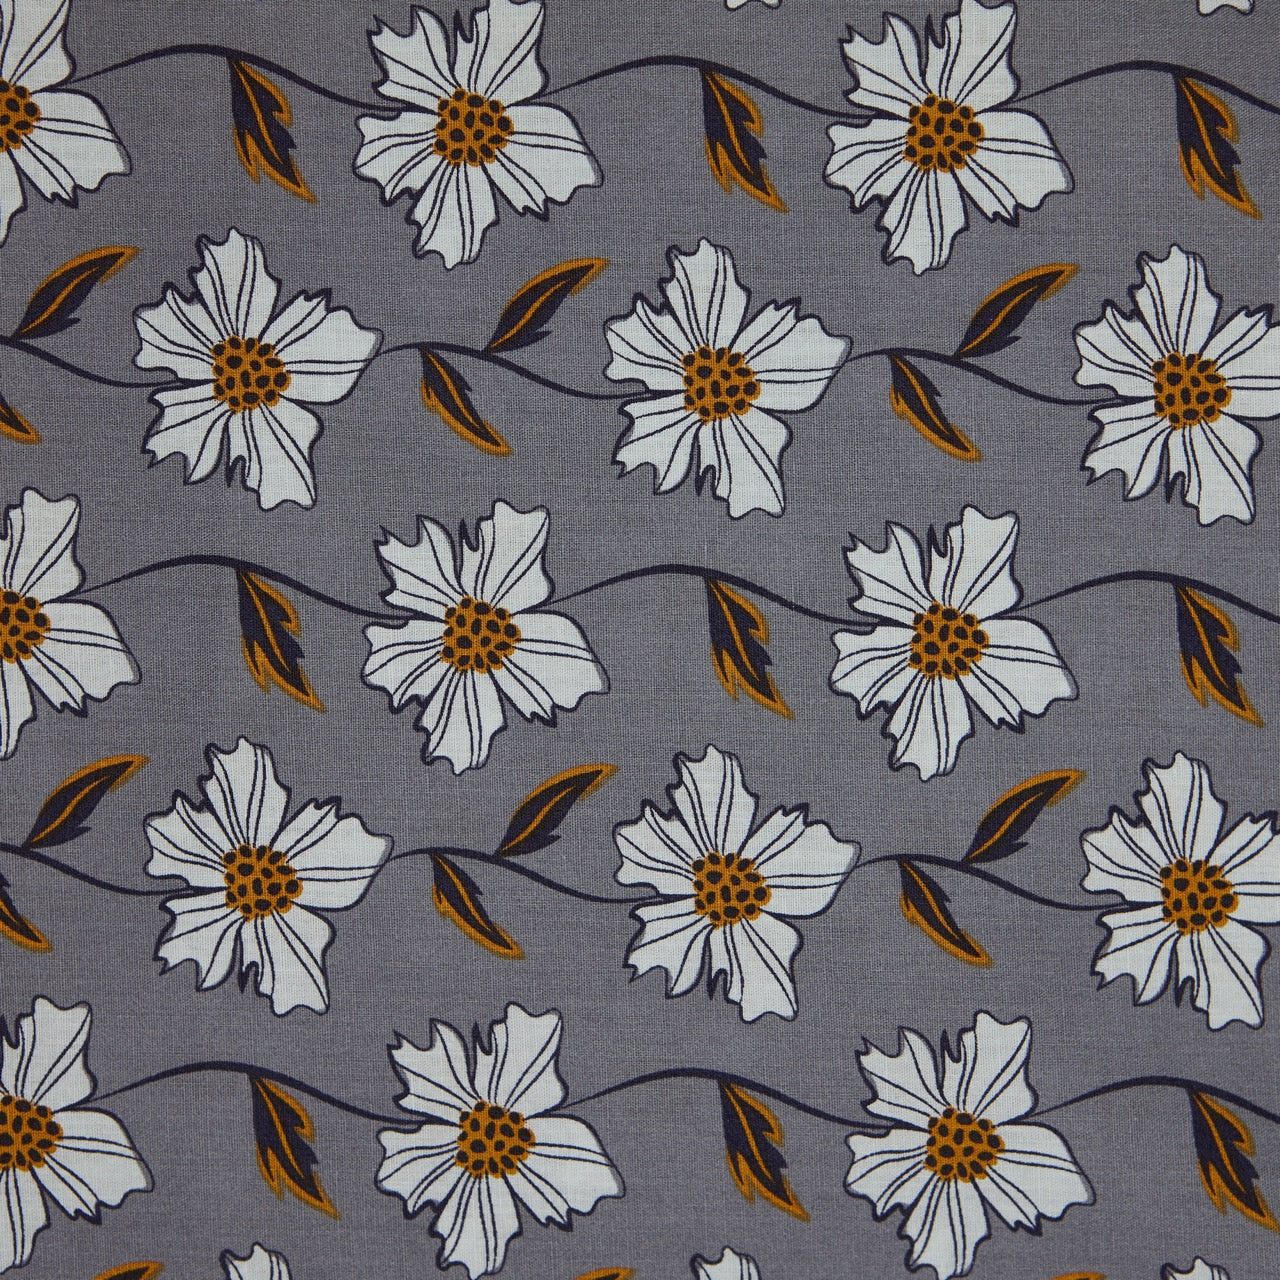 Cotton Floral - Daisy Chain - Grey (detail)